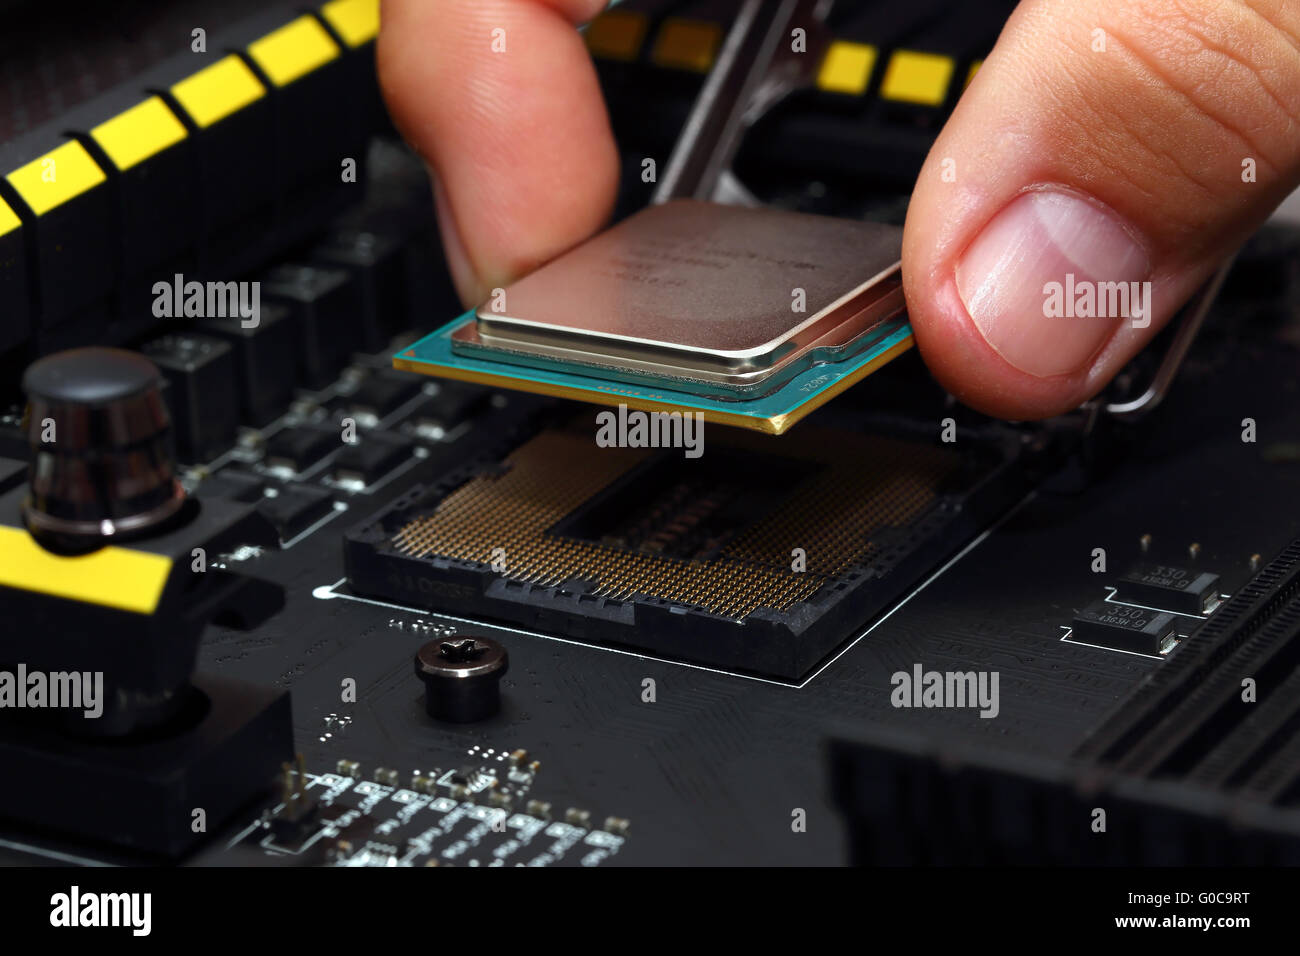 Installing central processor unit into motherboard Stock Photo